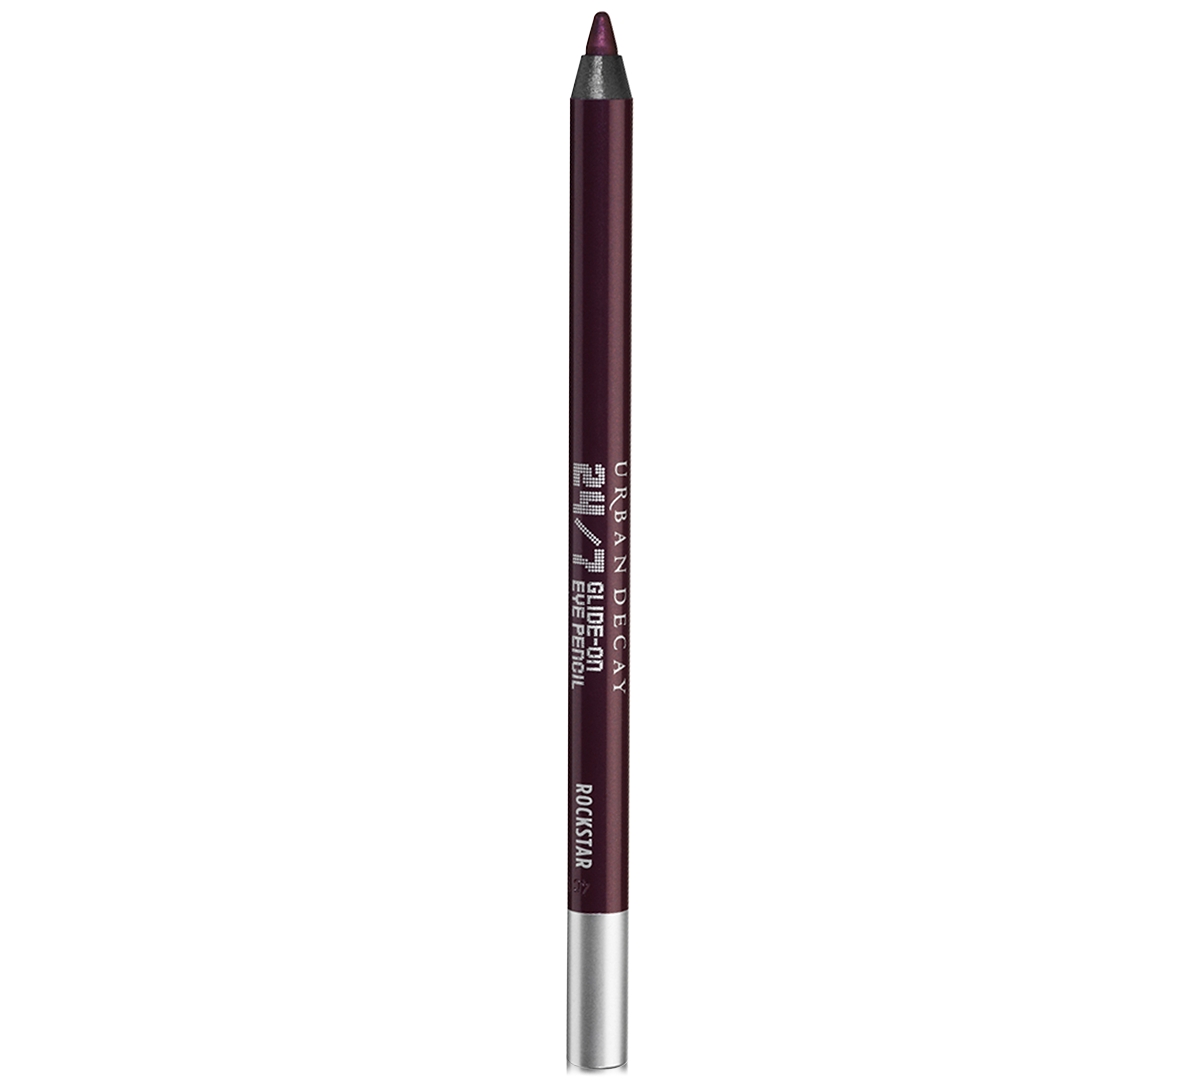 UPC 604214445802 product image for Urban Decay 24/7 Glide-On Waterproof Eyeliner Pencil | upcitemdb.com